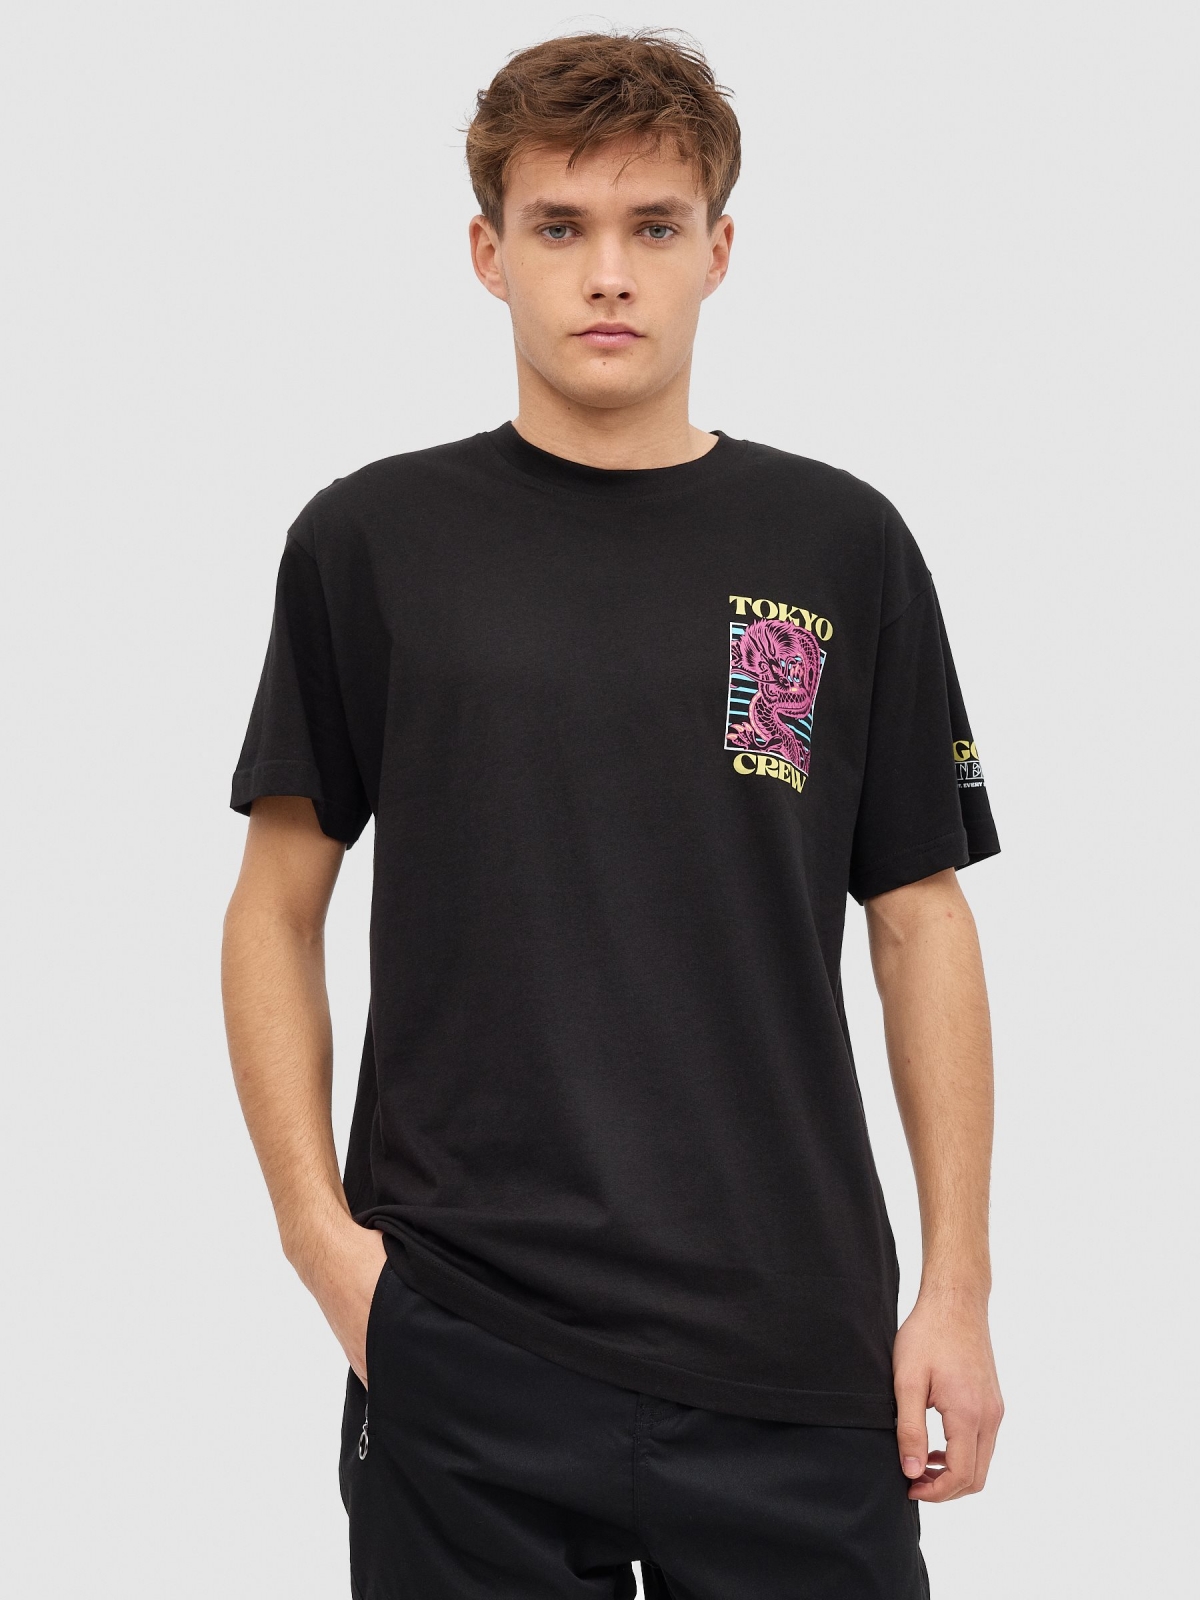 Japanese dragon T-shirt black middle front view